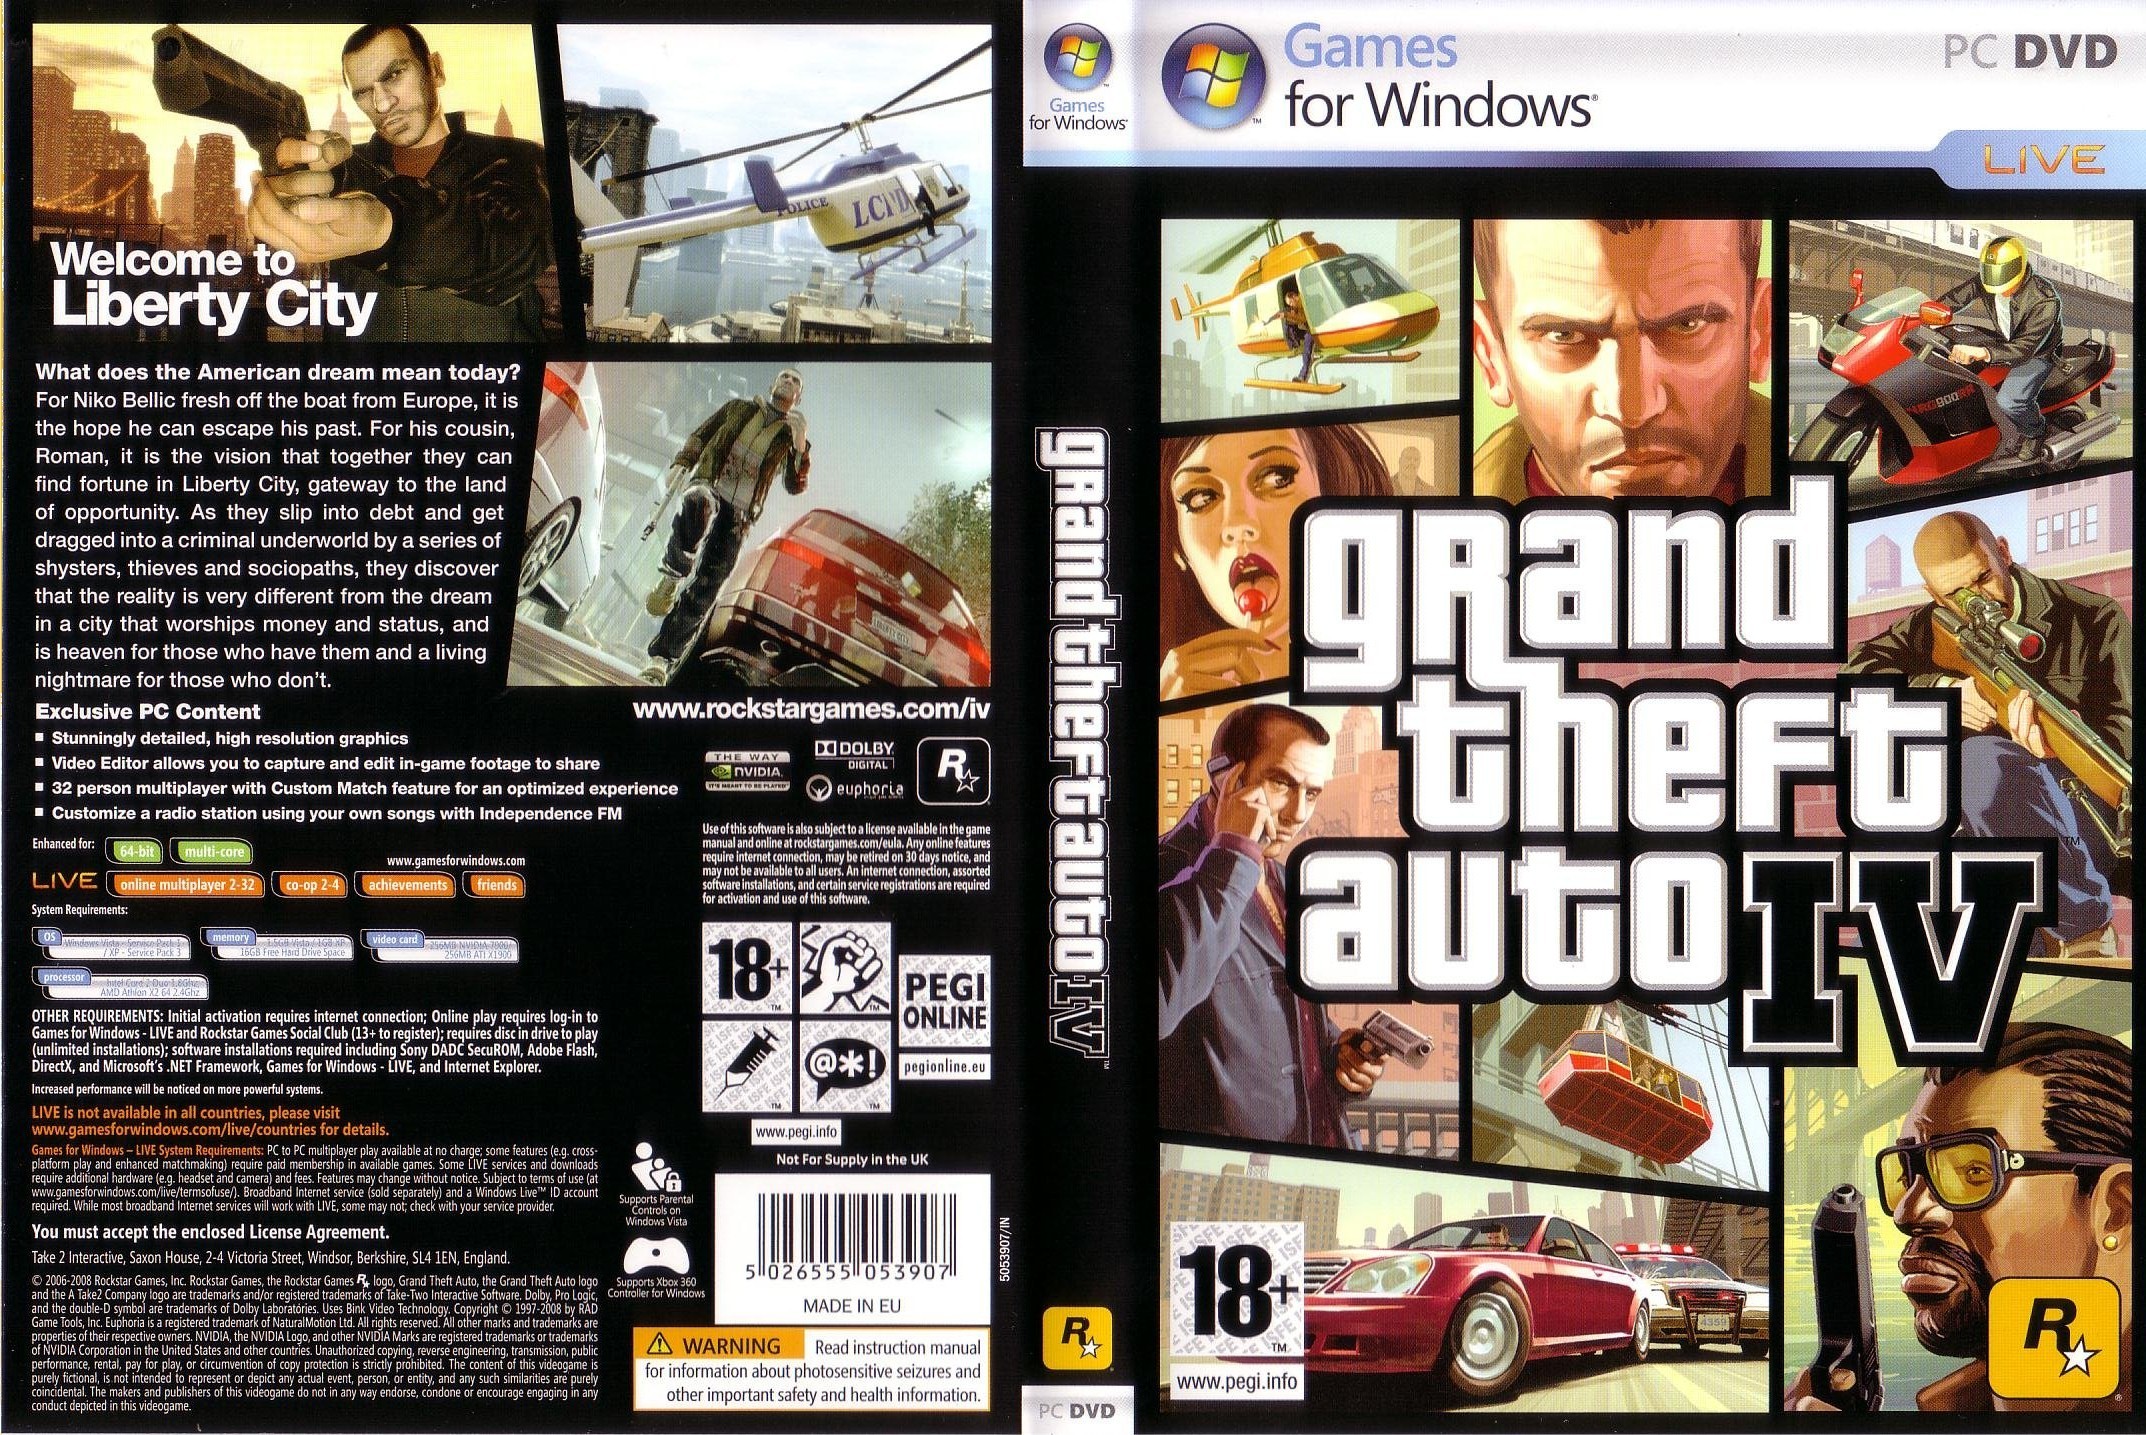 gta iv download for pc free full version game for windows 7